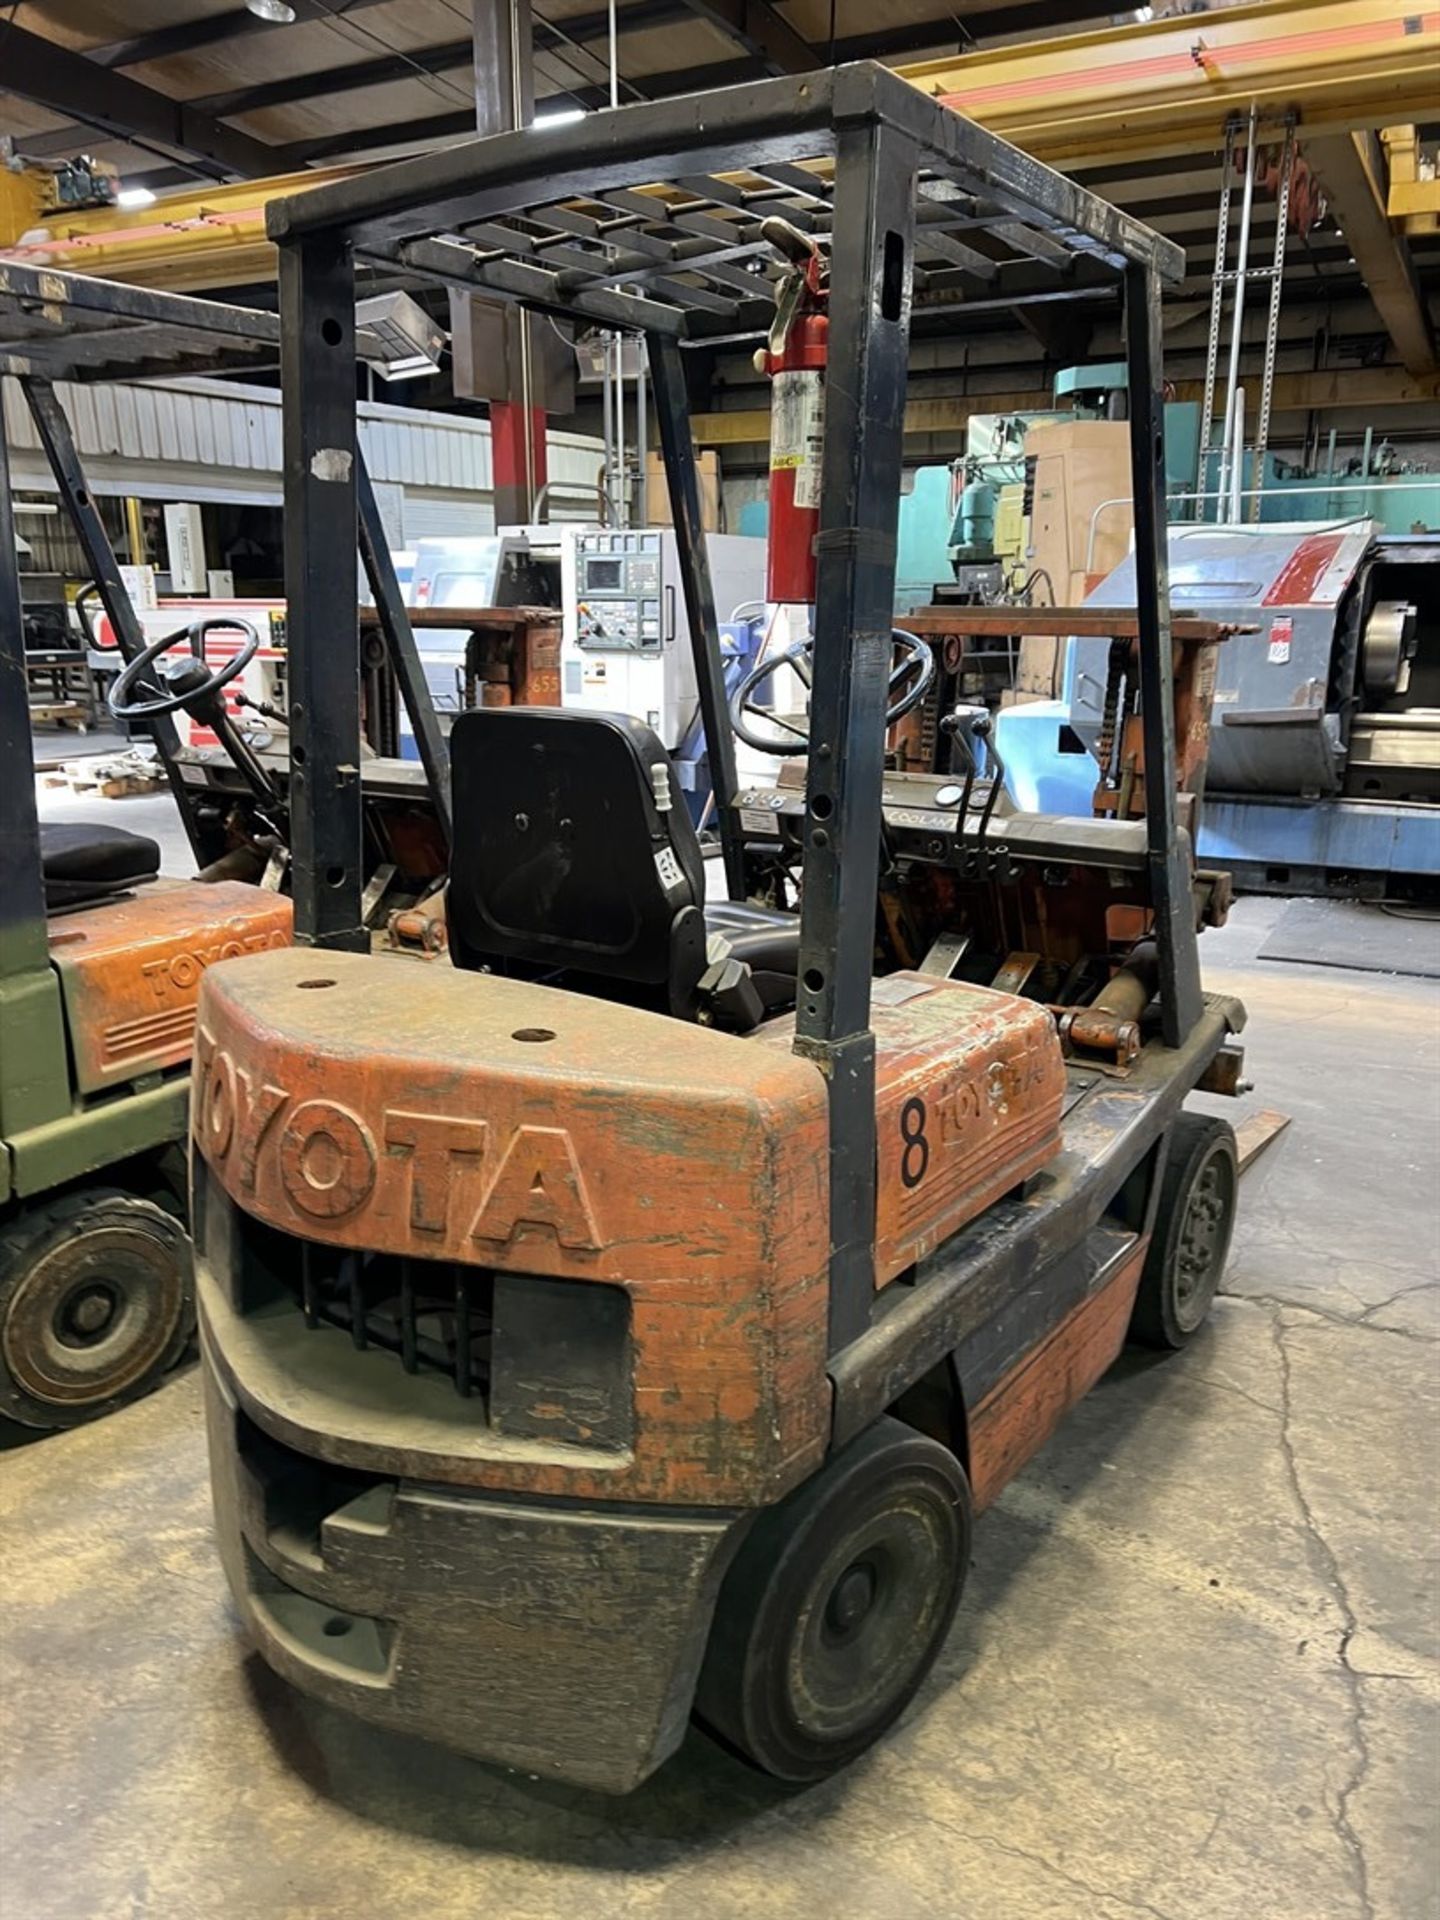 TOYOTA 02-2FDC20 Short Mast LP Forklift, s/n 2FDC25-12572, 4000 Lb Capacity, 2-Stage Mast, OH - Image 4 of 9